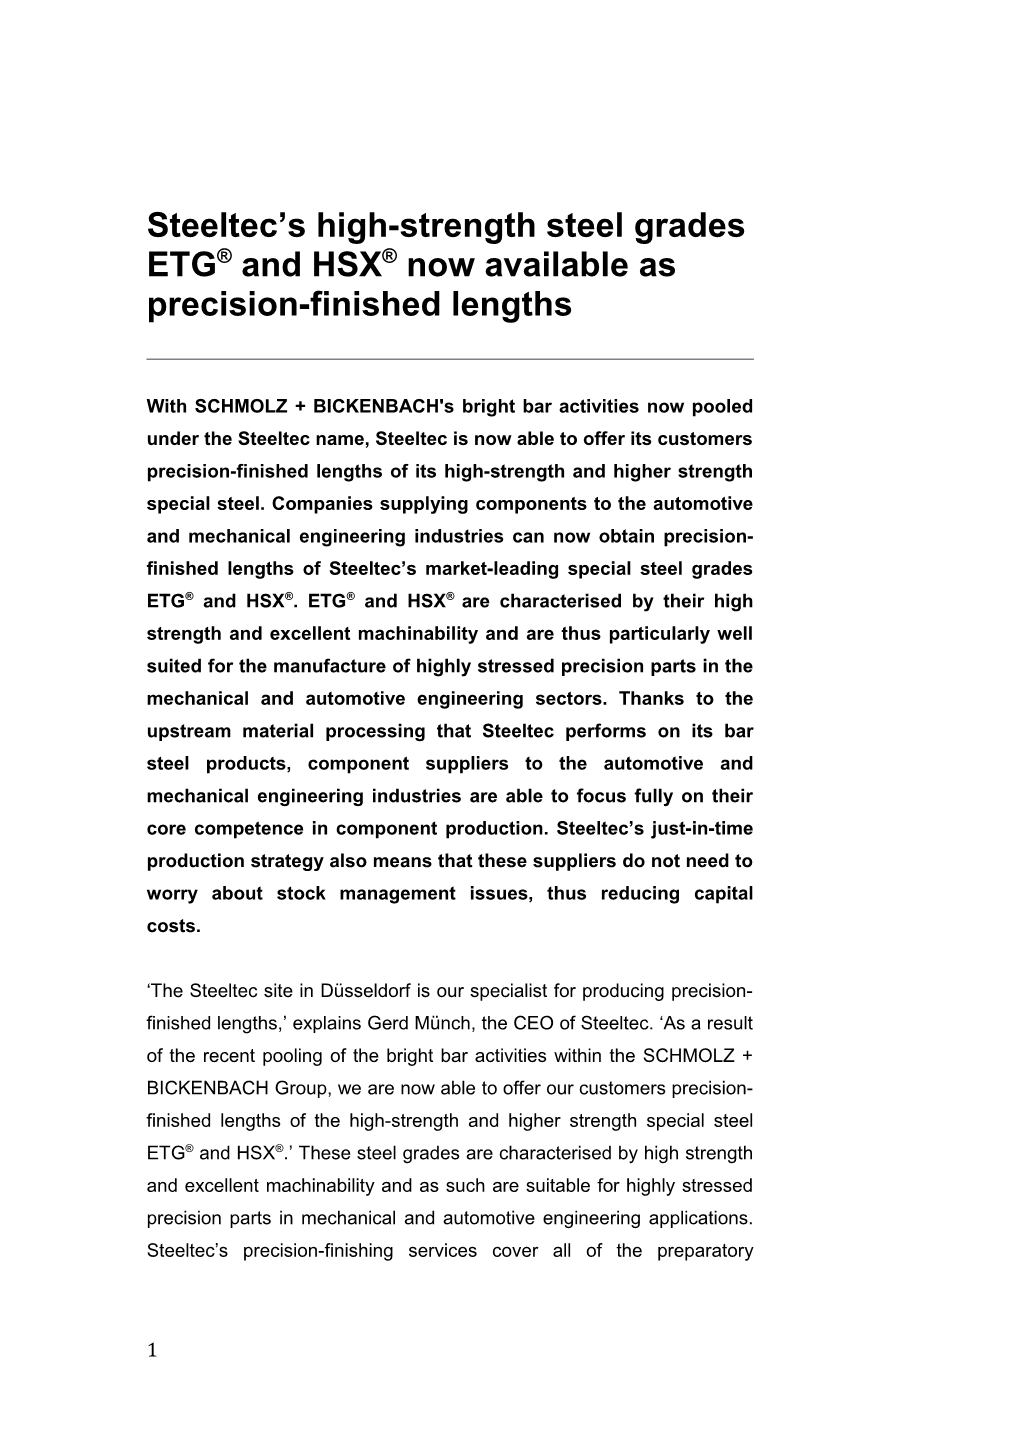 Steeltec S High-Strength Steel Grades ETG and HSX Now Available As Precision-Finished Lengths